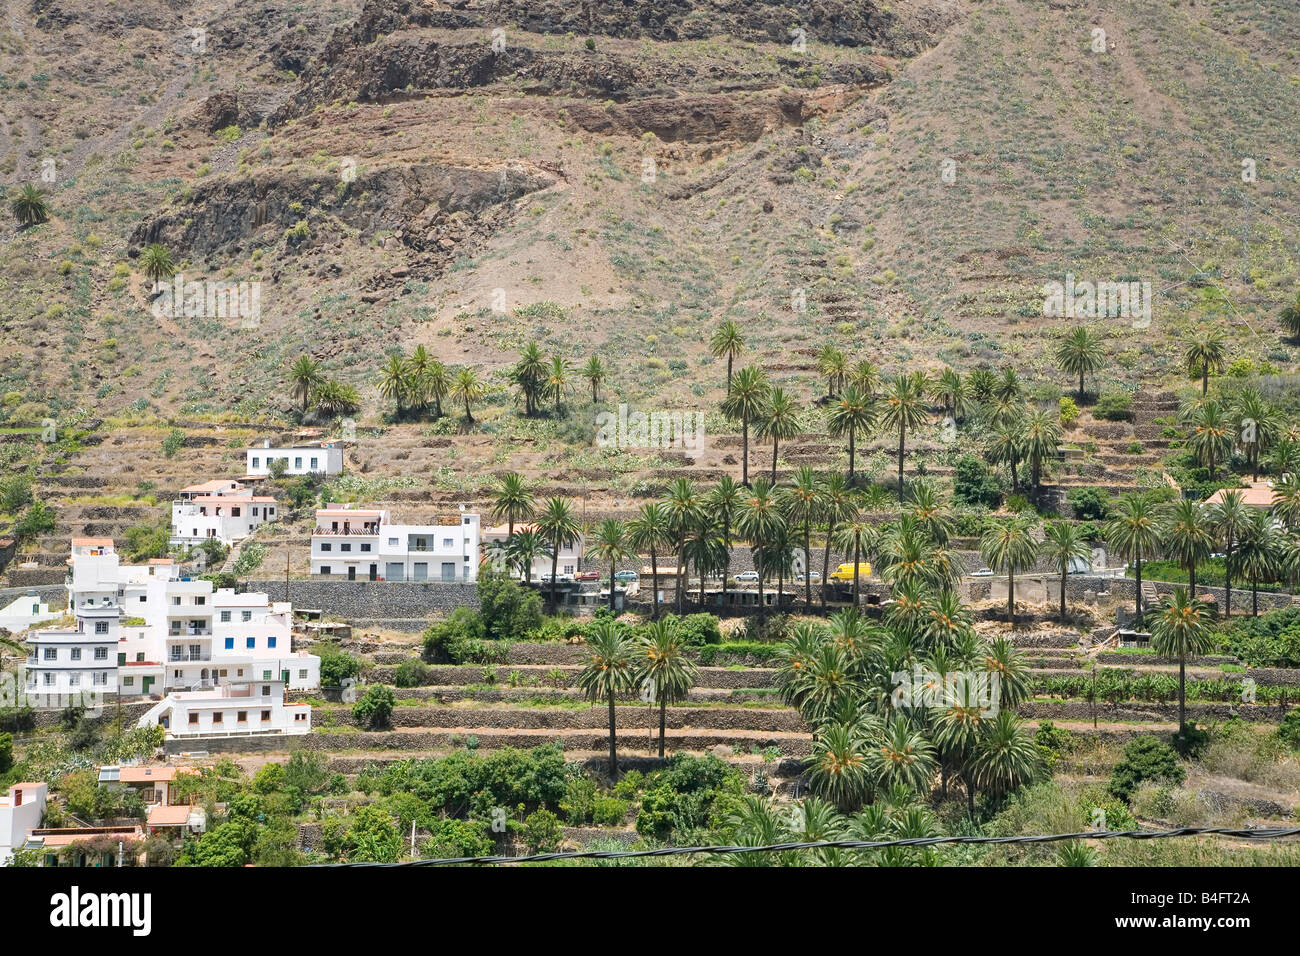 Terraces of palm trees on the island of La Gomera La Gomera is situated very close to Tenerife and is one of the Canary Islands Stock Photo